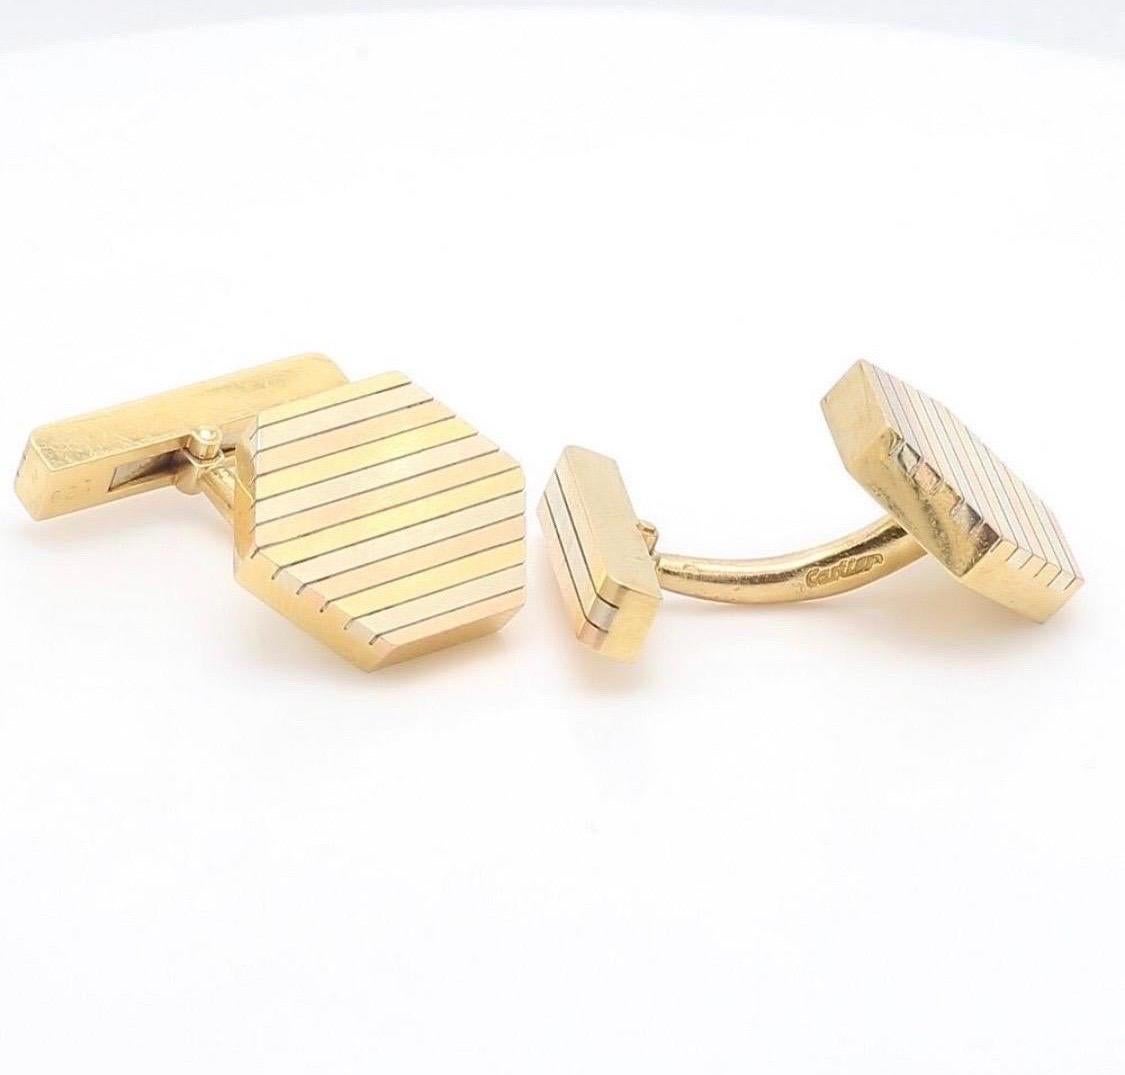 Elegant pair of Cartier gentleman cufflinks.
This pair of cufflinks explfies Cartier of the 1980's, classy and refined elegance at its best.
viewings available in our NYC wholesale office by appointment.,